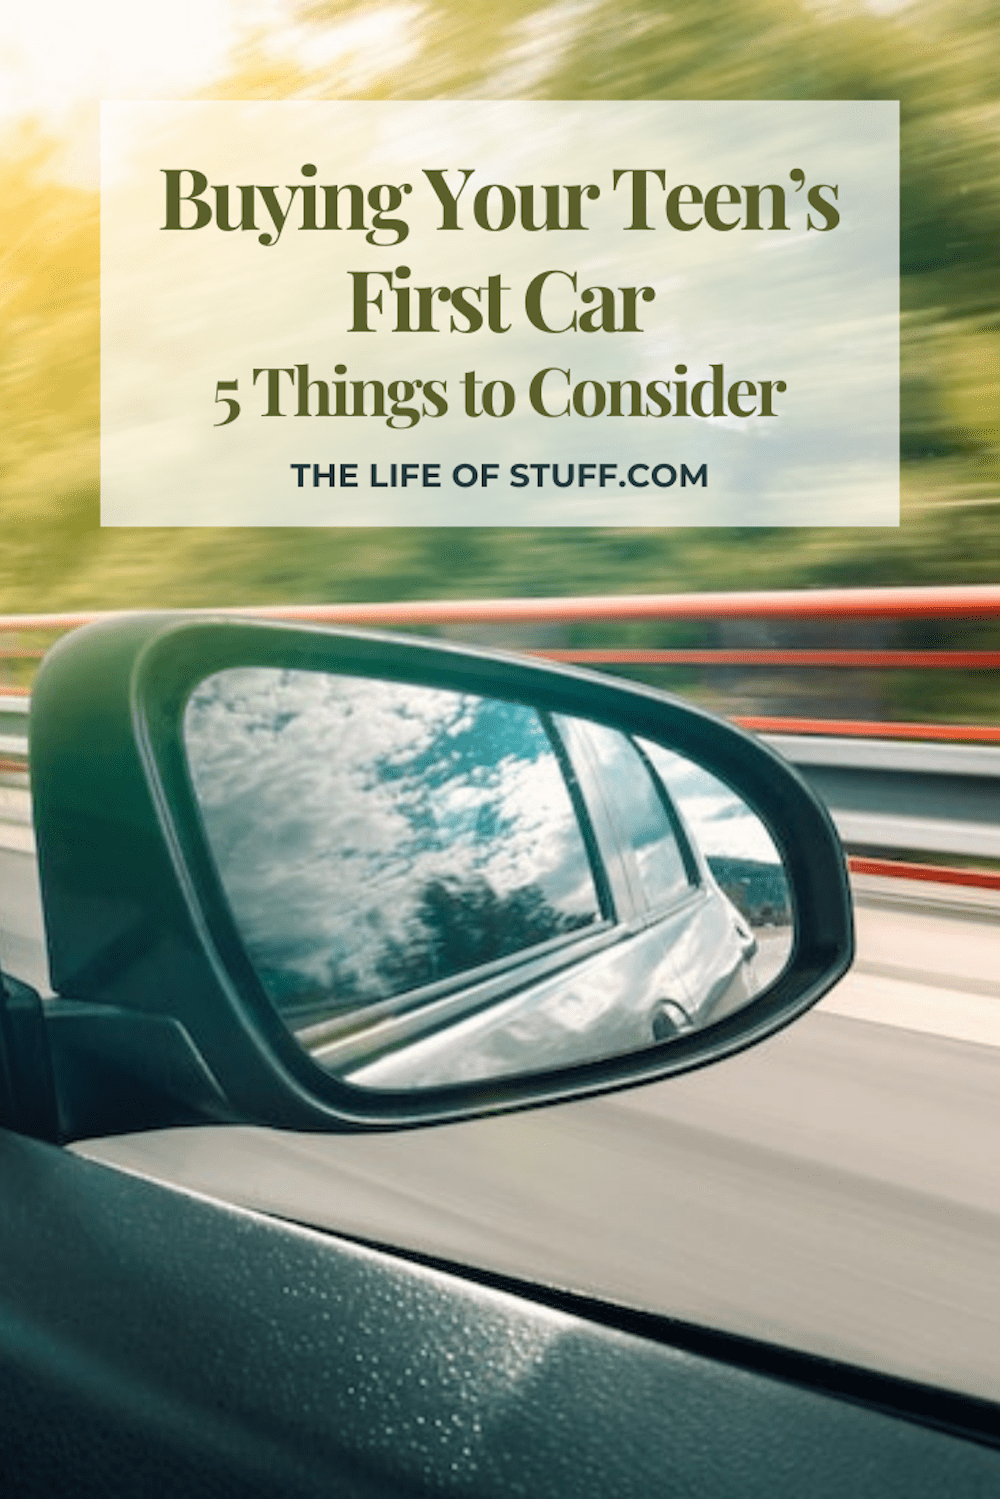 Buying Your Teen’s First Car - 5 Things to Consider - The Life of Stuff